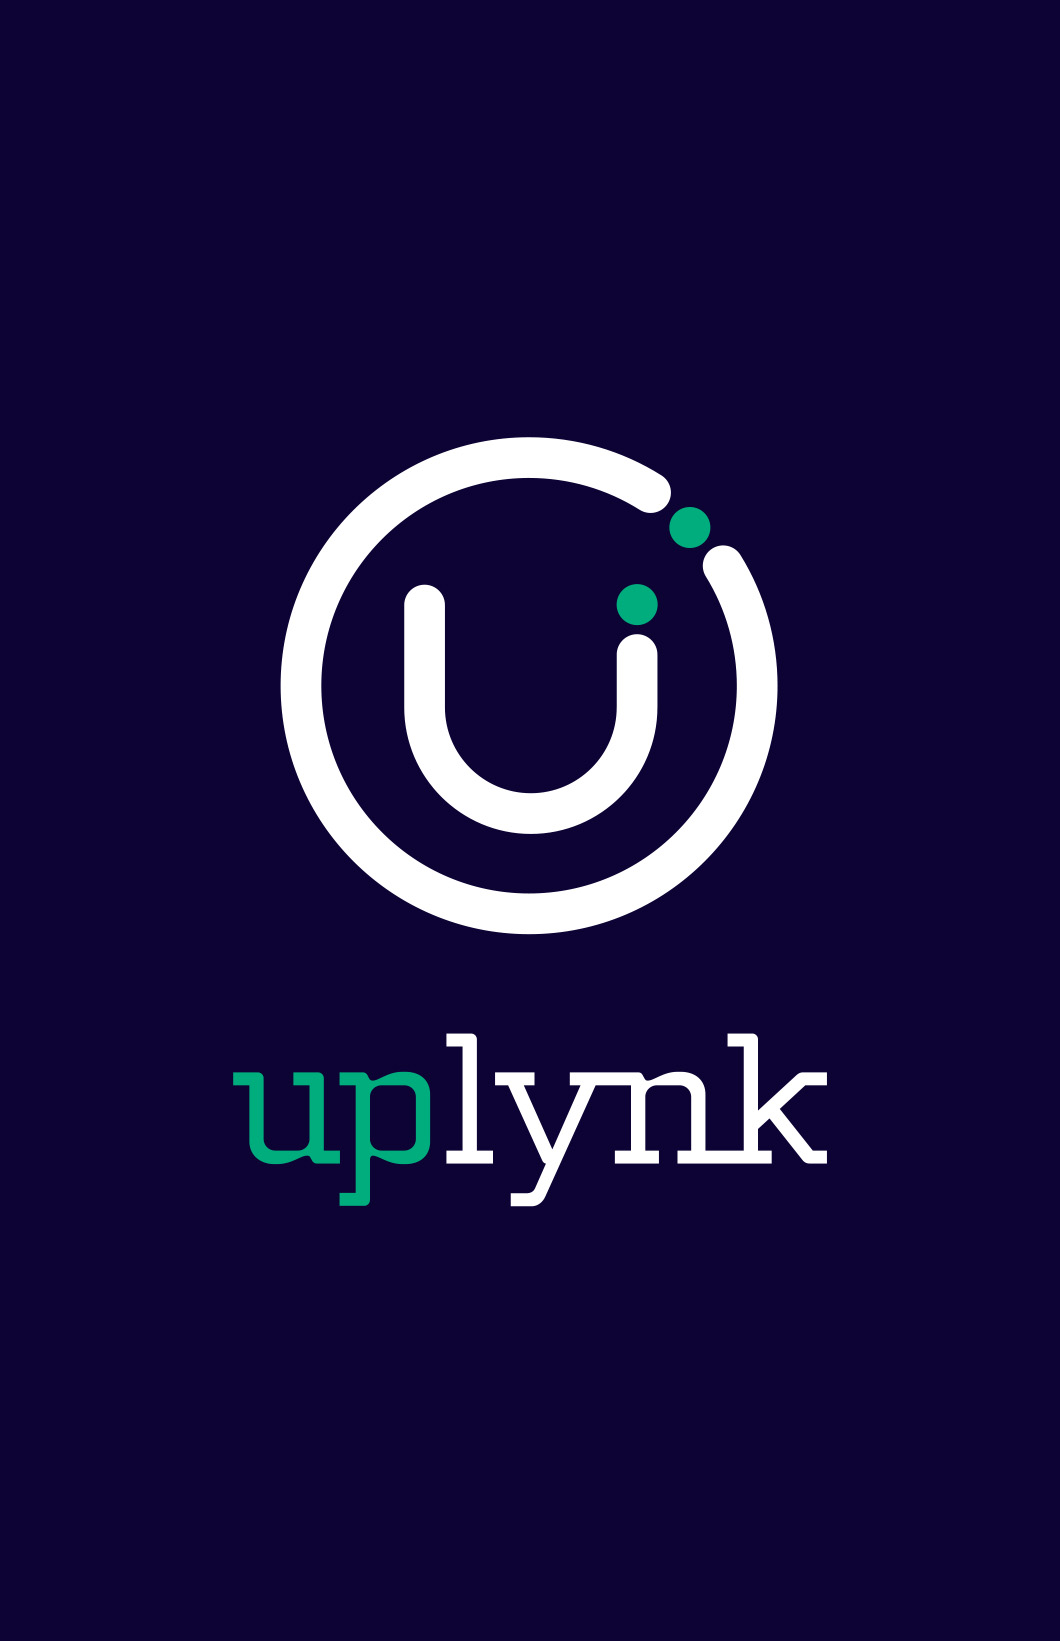 Uplynk Technology Works